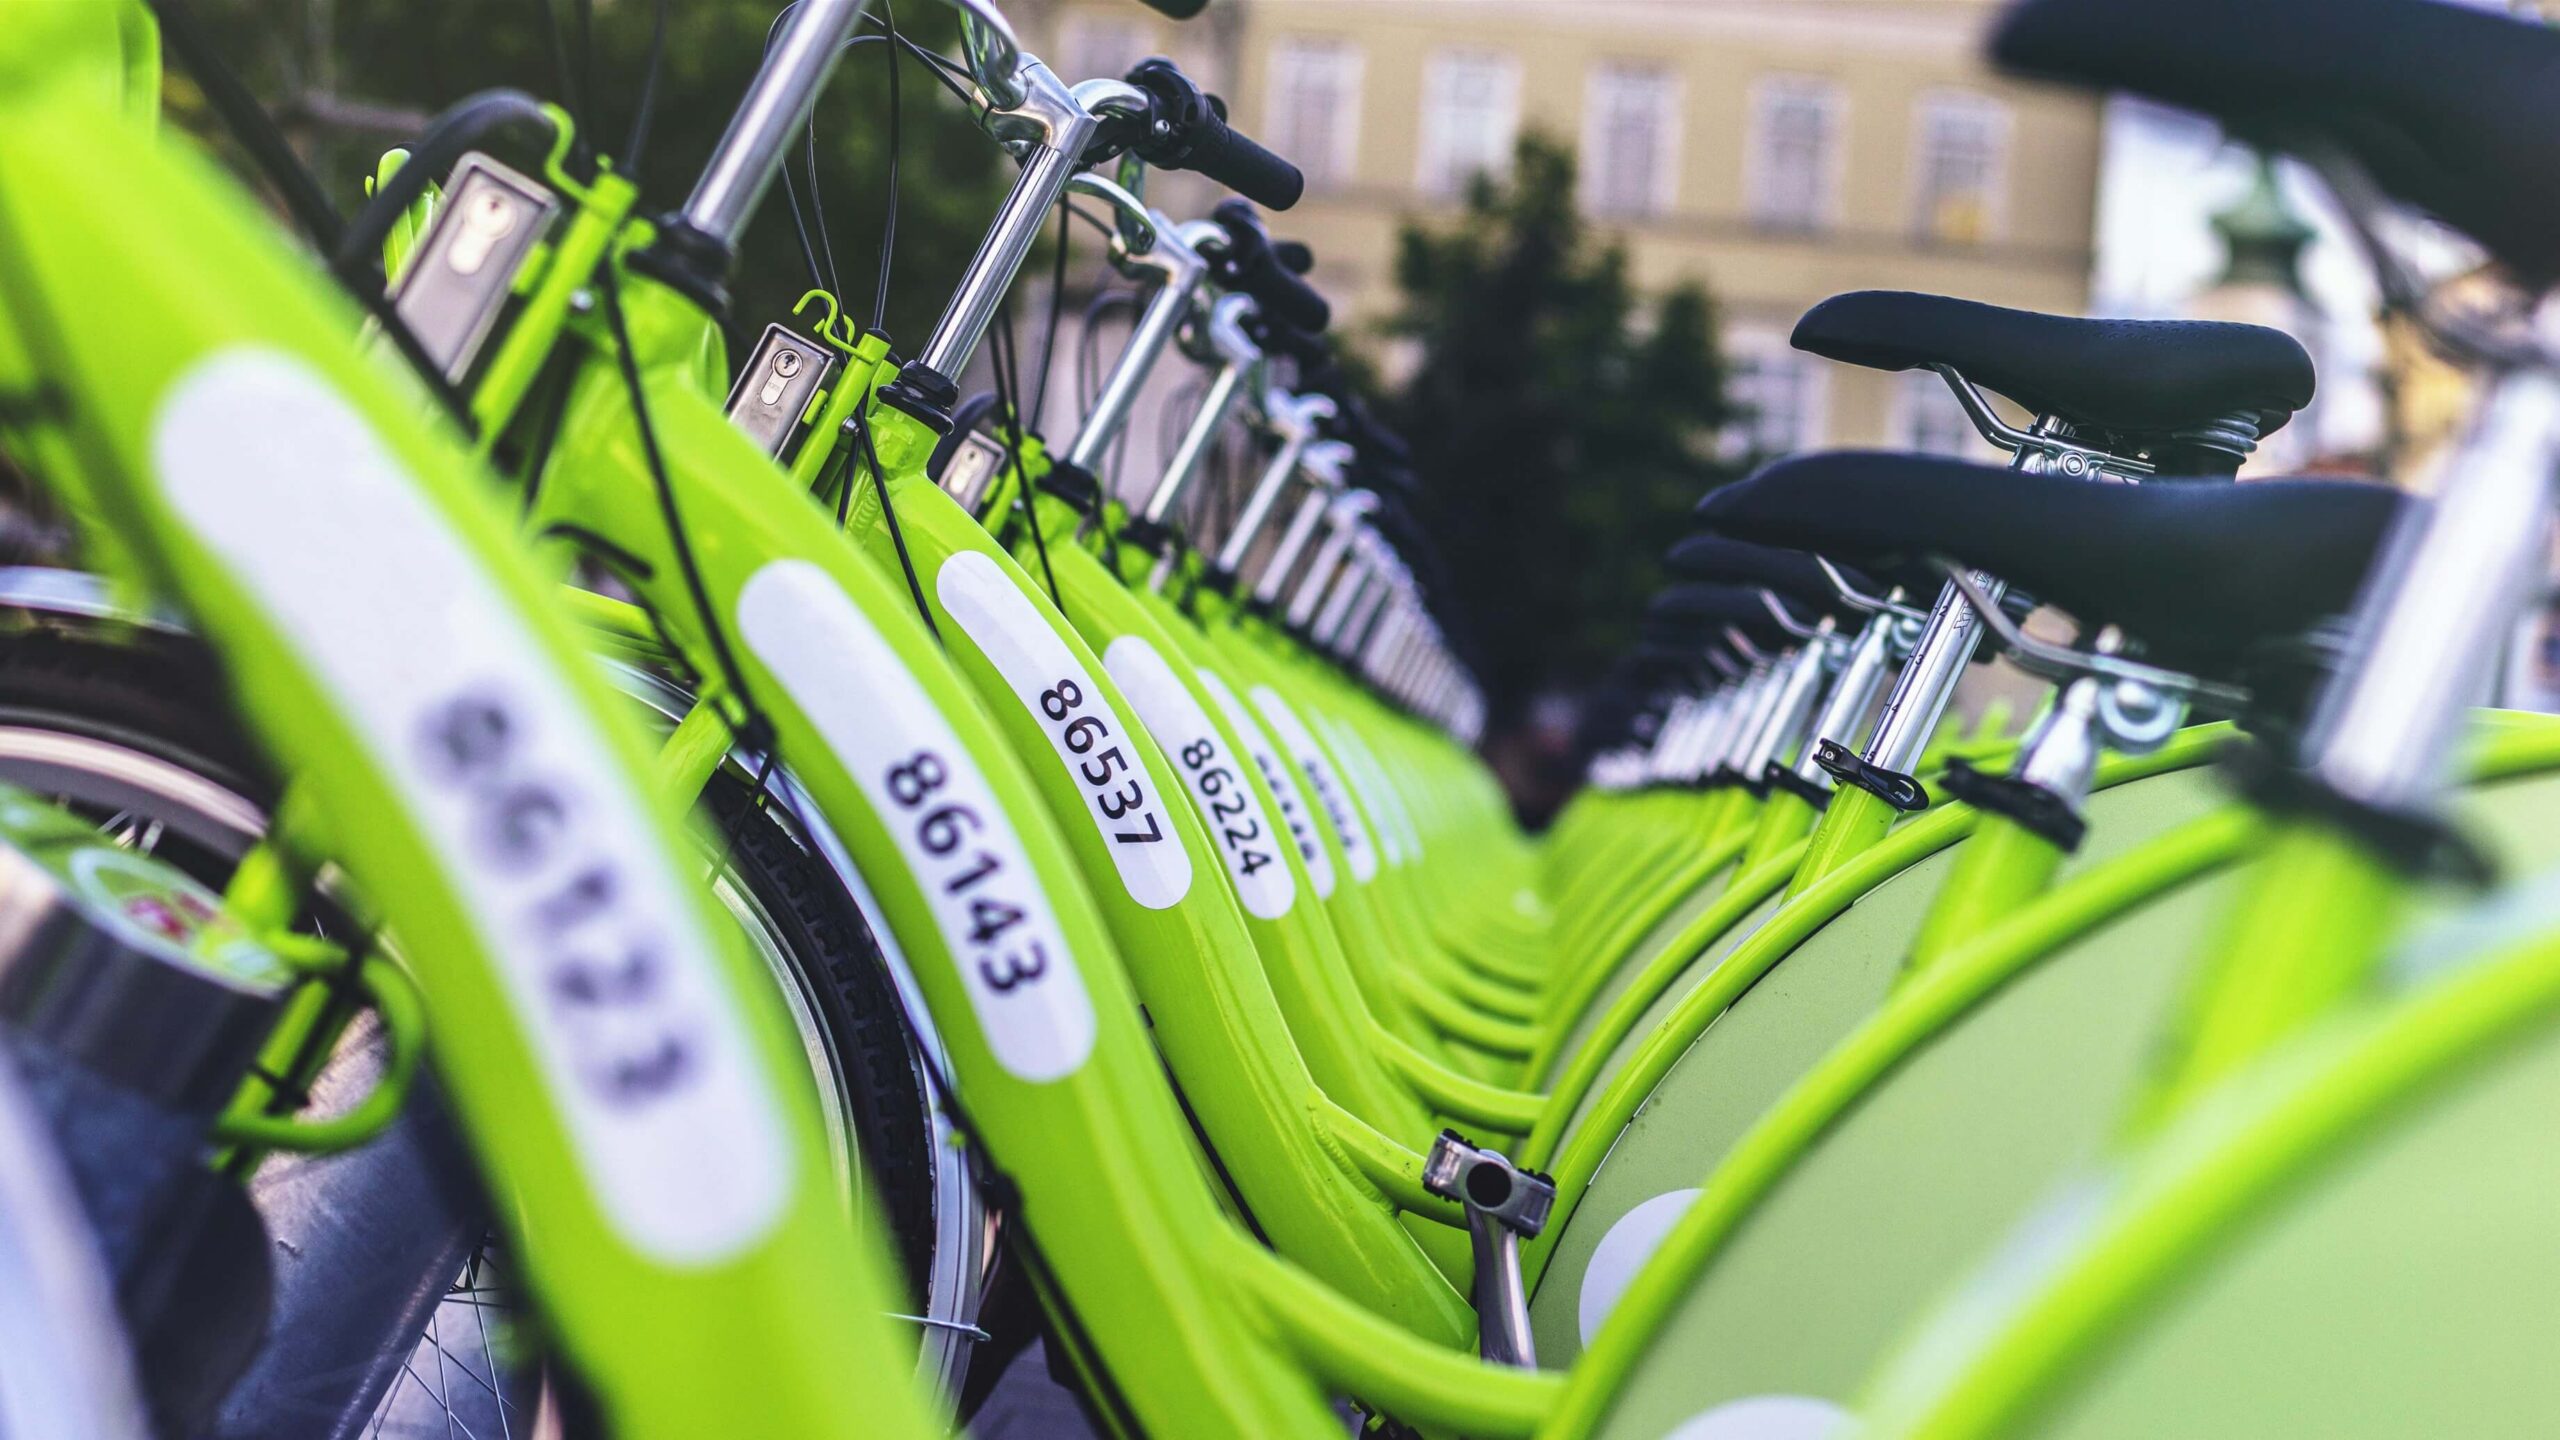 Bright green MOL BuBi bikes standing a rack in Budapest.